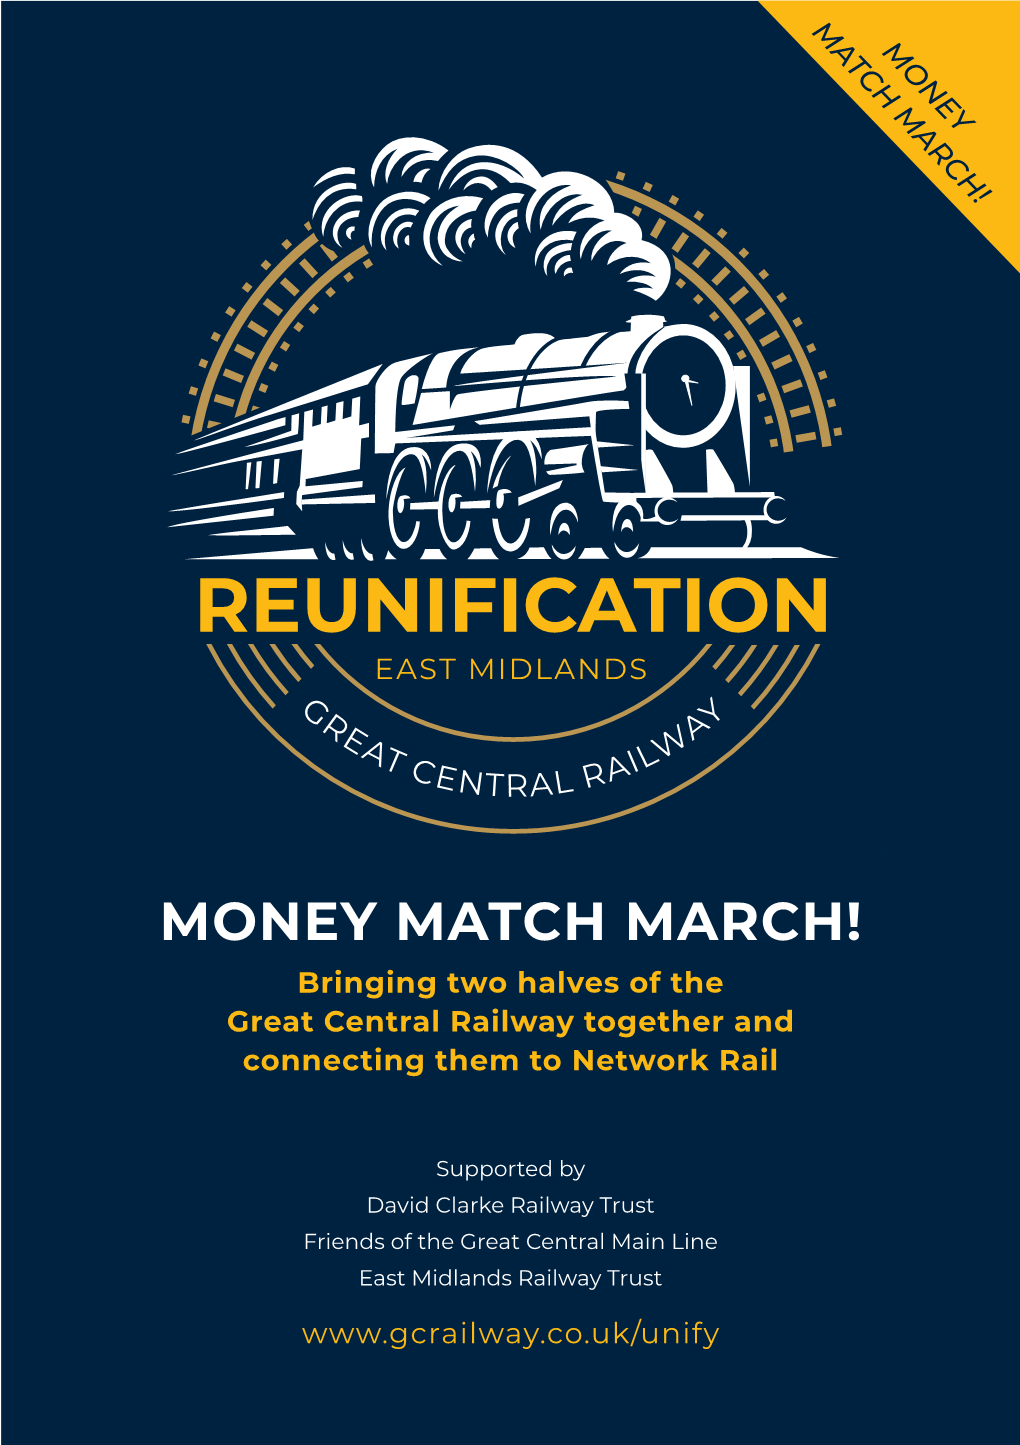 MONEY MATCH MARCH! Bringing Two Halves of the Great Central Railway Together and Connecting Them to Network Rail